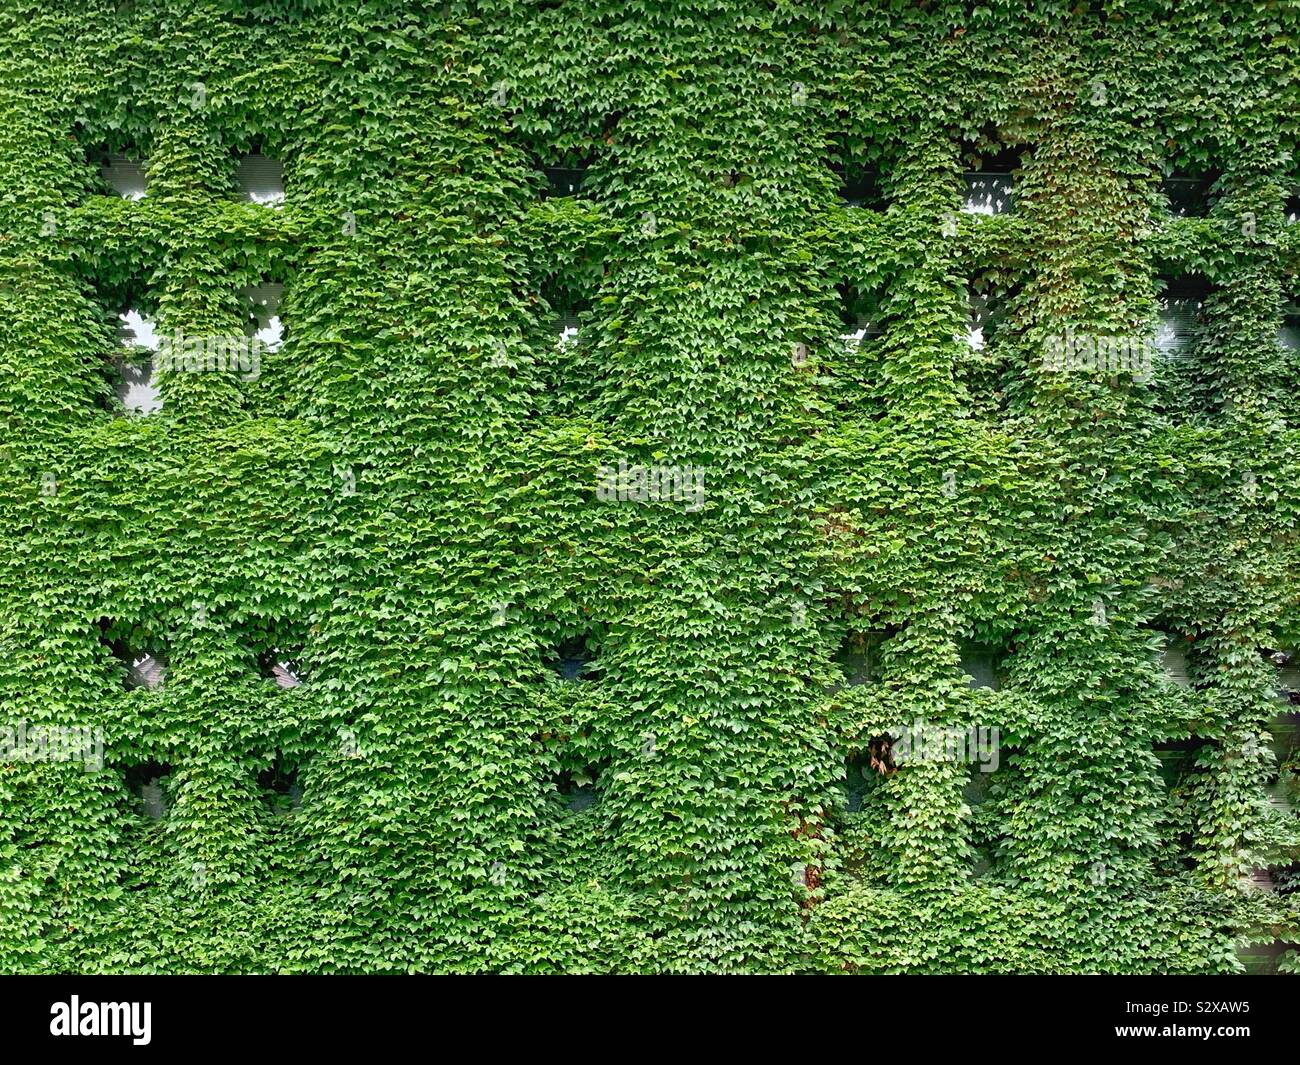 Ivy League ivy covered walls of an academic building. Stock Photo